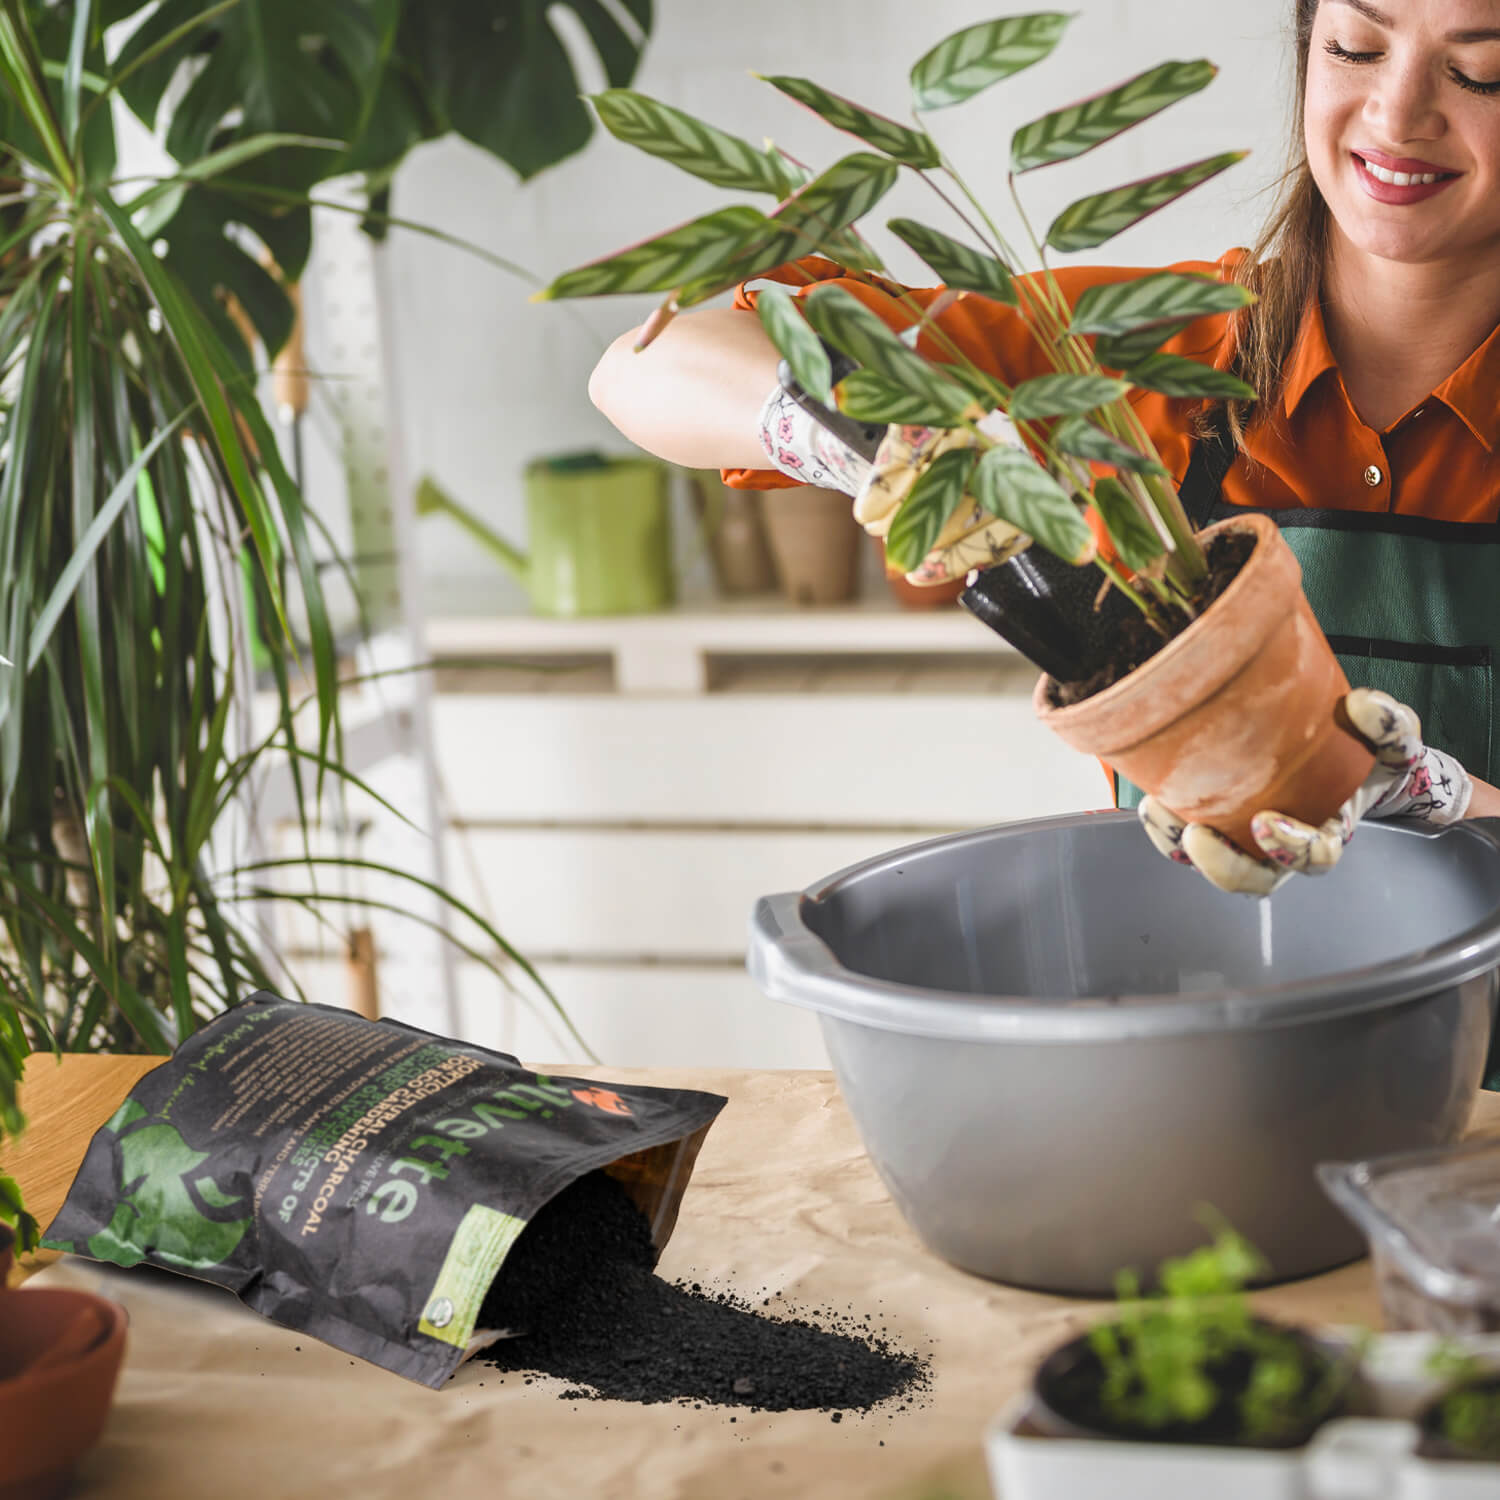 Horticultural Charcoal: What Is It And How Do You Use It?